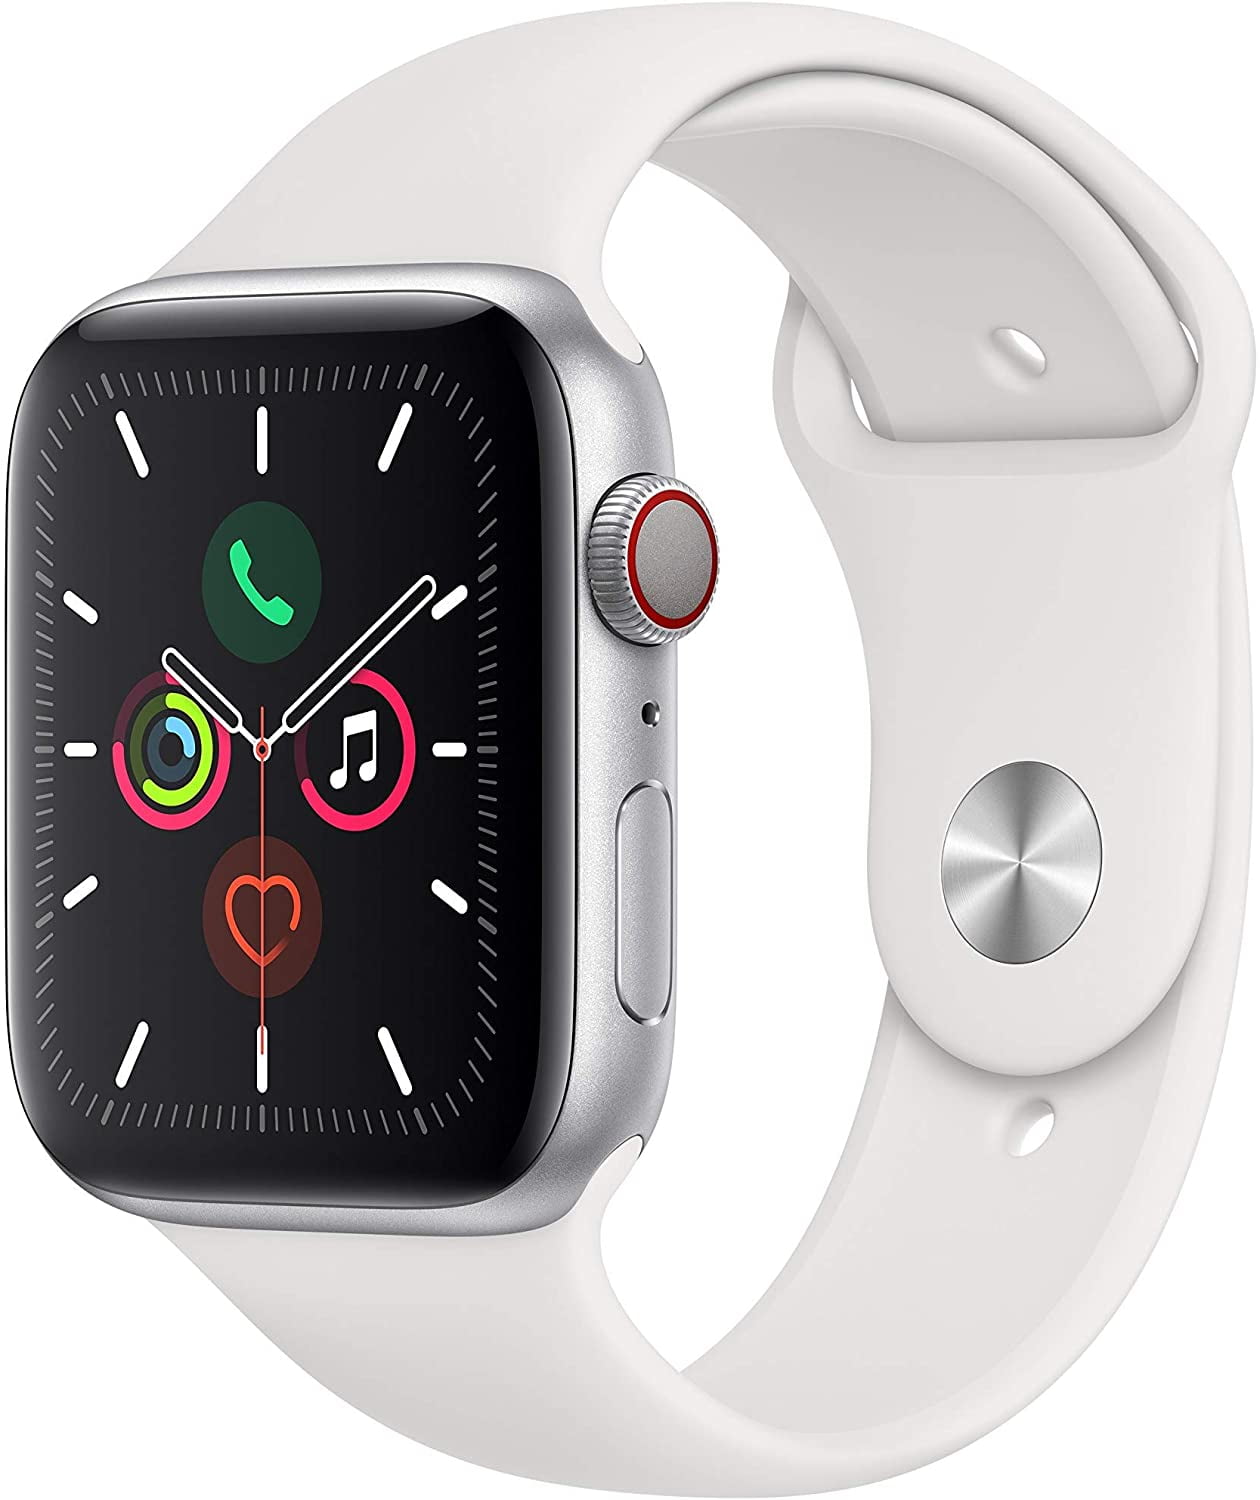 Apple Watch Series 2 - 42mm, WiFi - Space Gray with Black Sport 